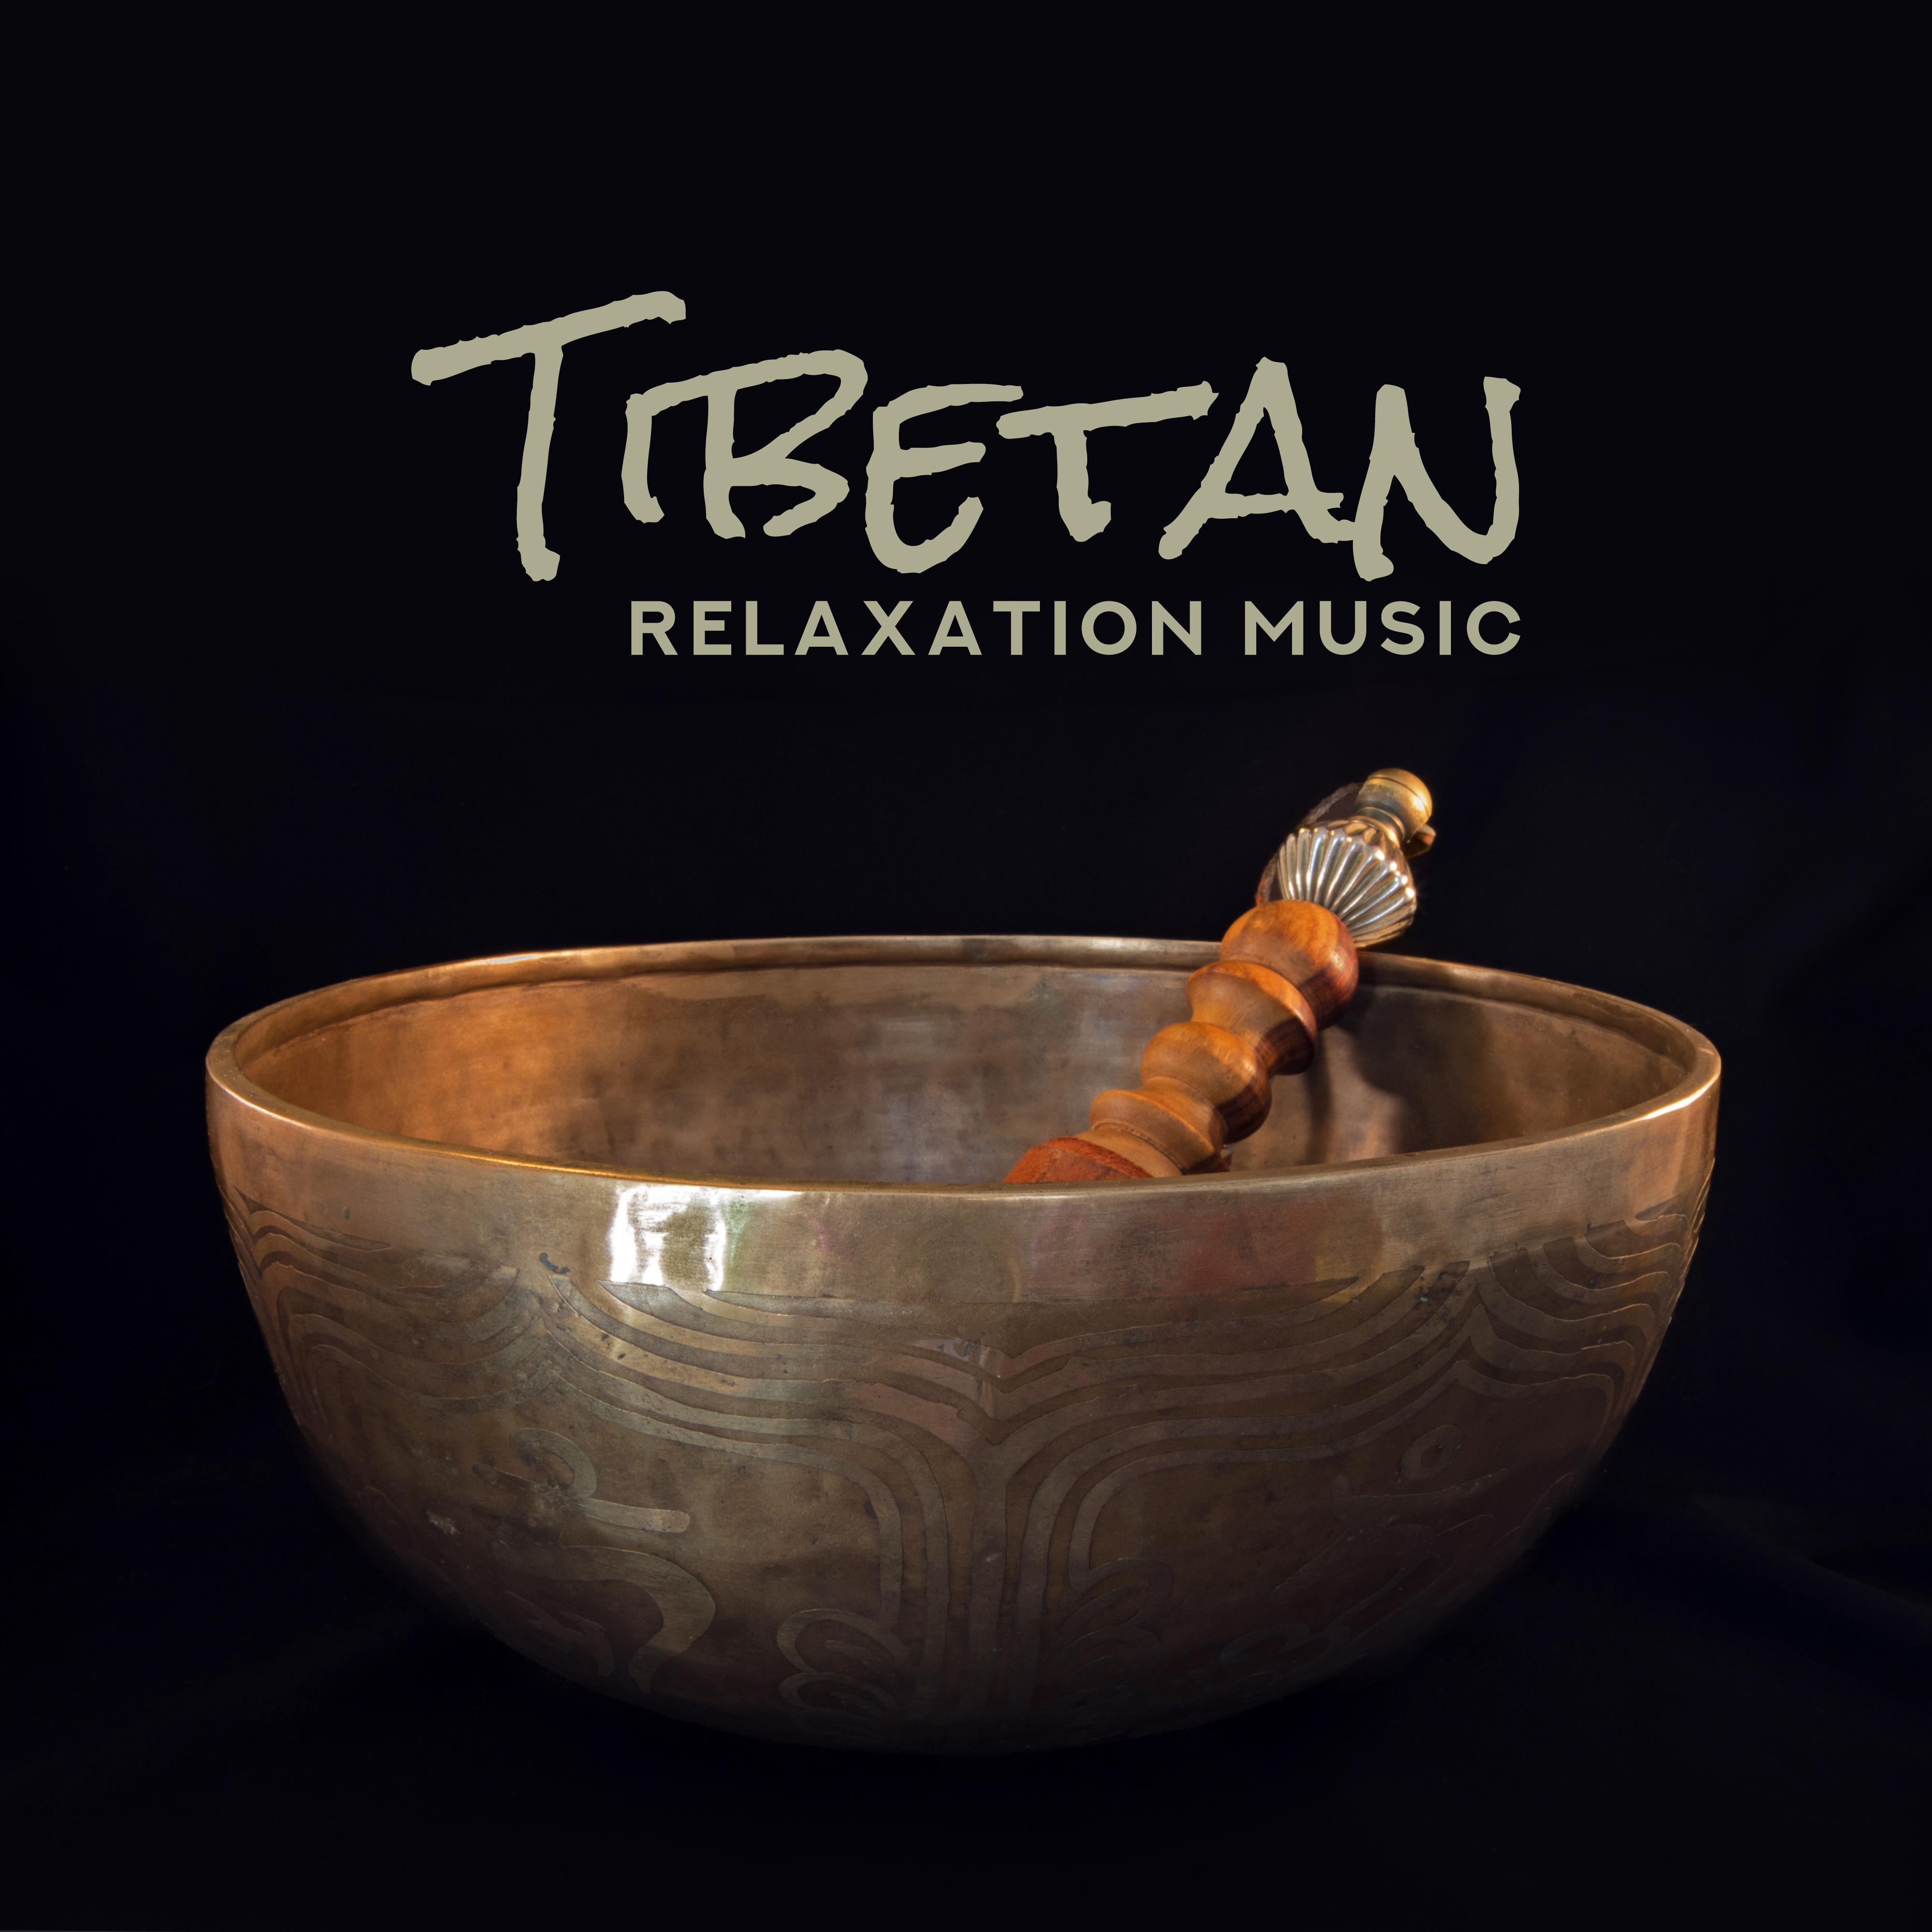 Tibetan Relaxation Music - For Meditation, Yoga, Contemplation, Massage, Spa or Relaxation